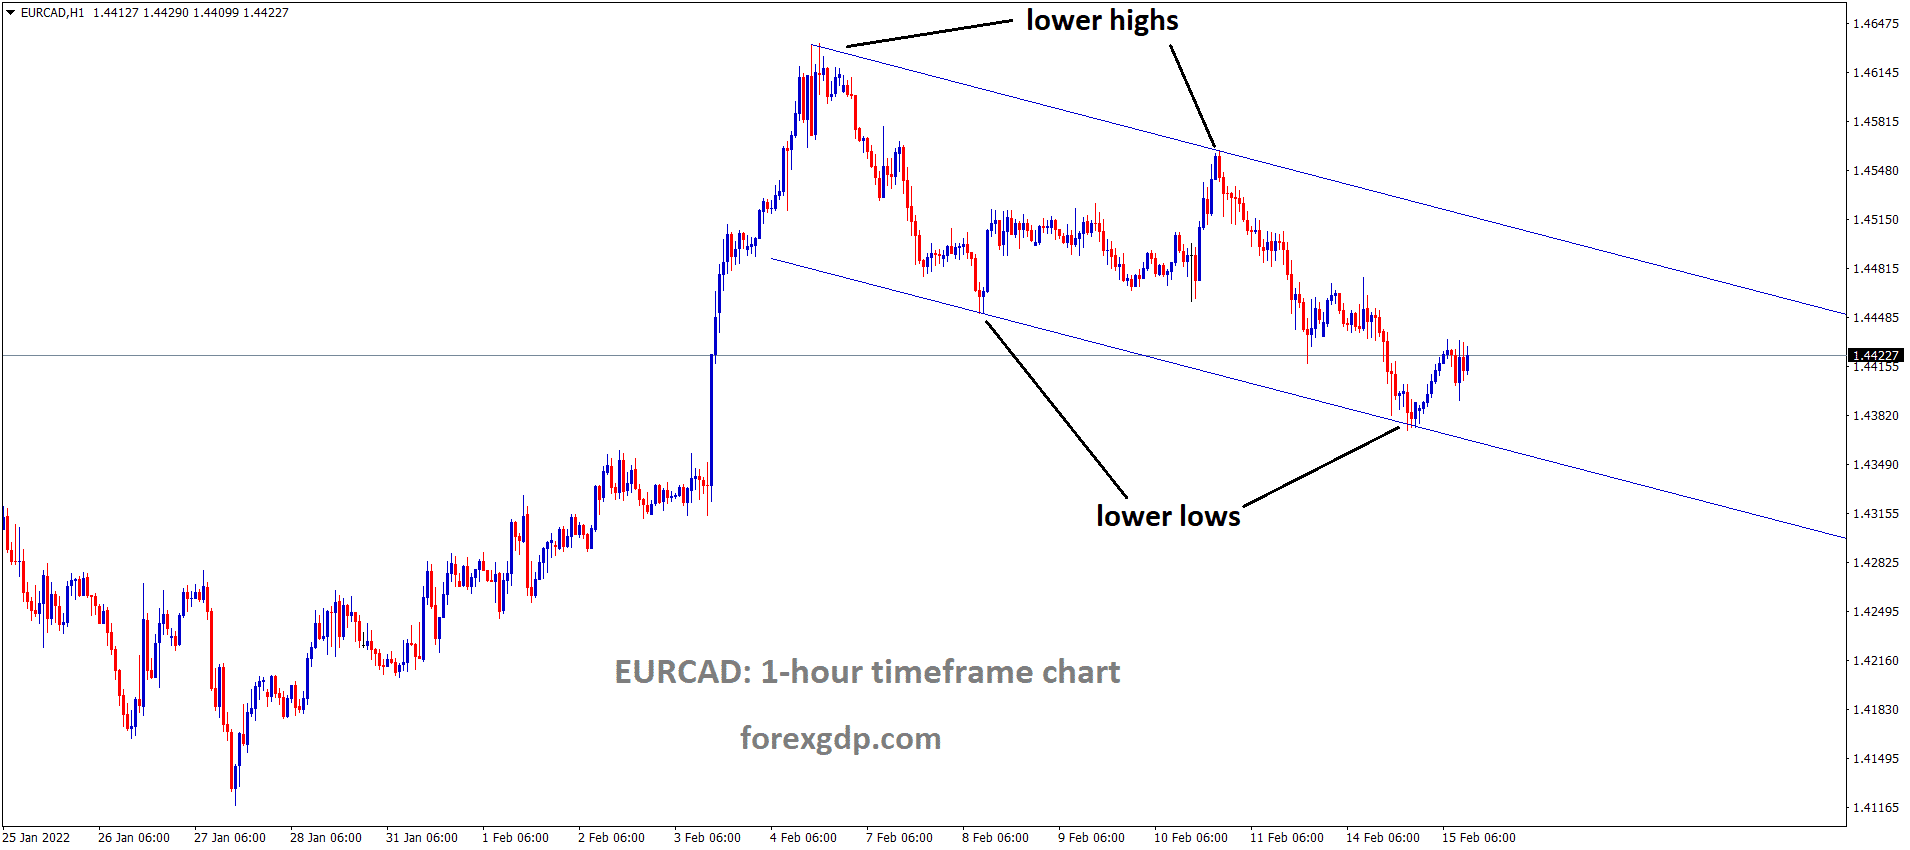 EURCAD is moving in the Descending channel and the market has rebounded from the lower low area of the channel